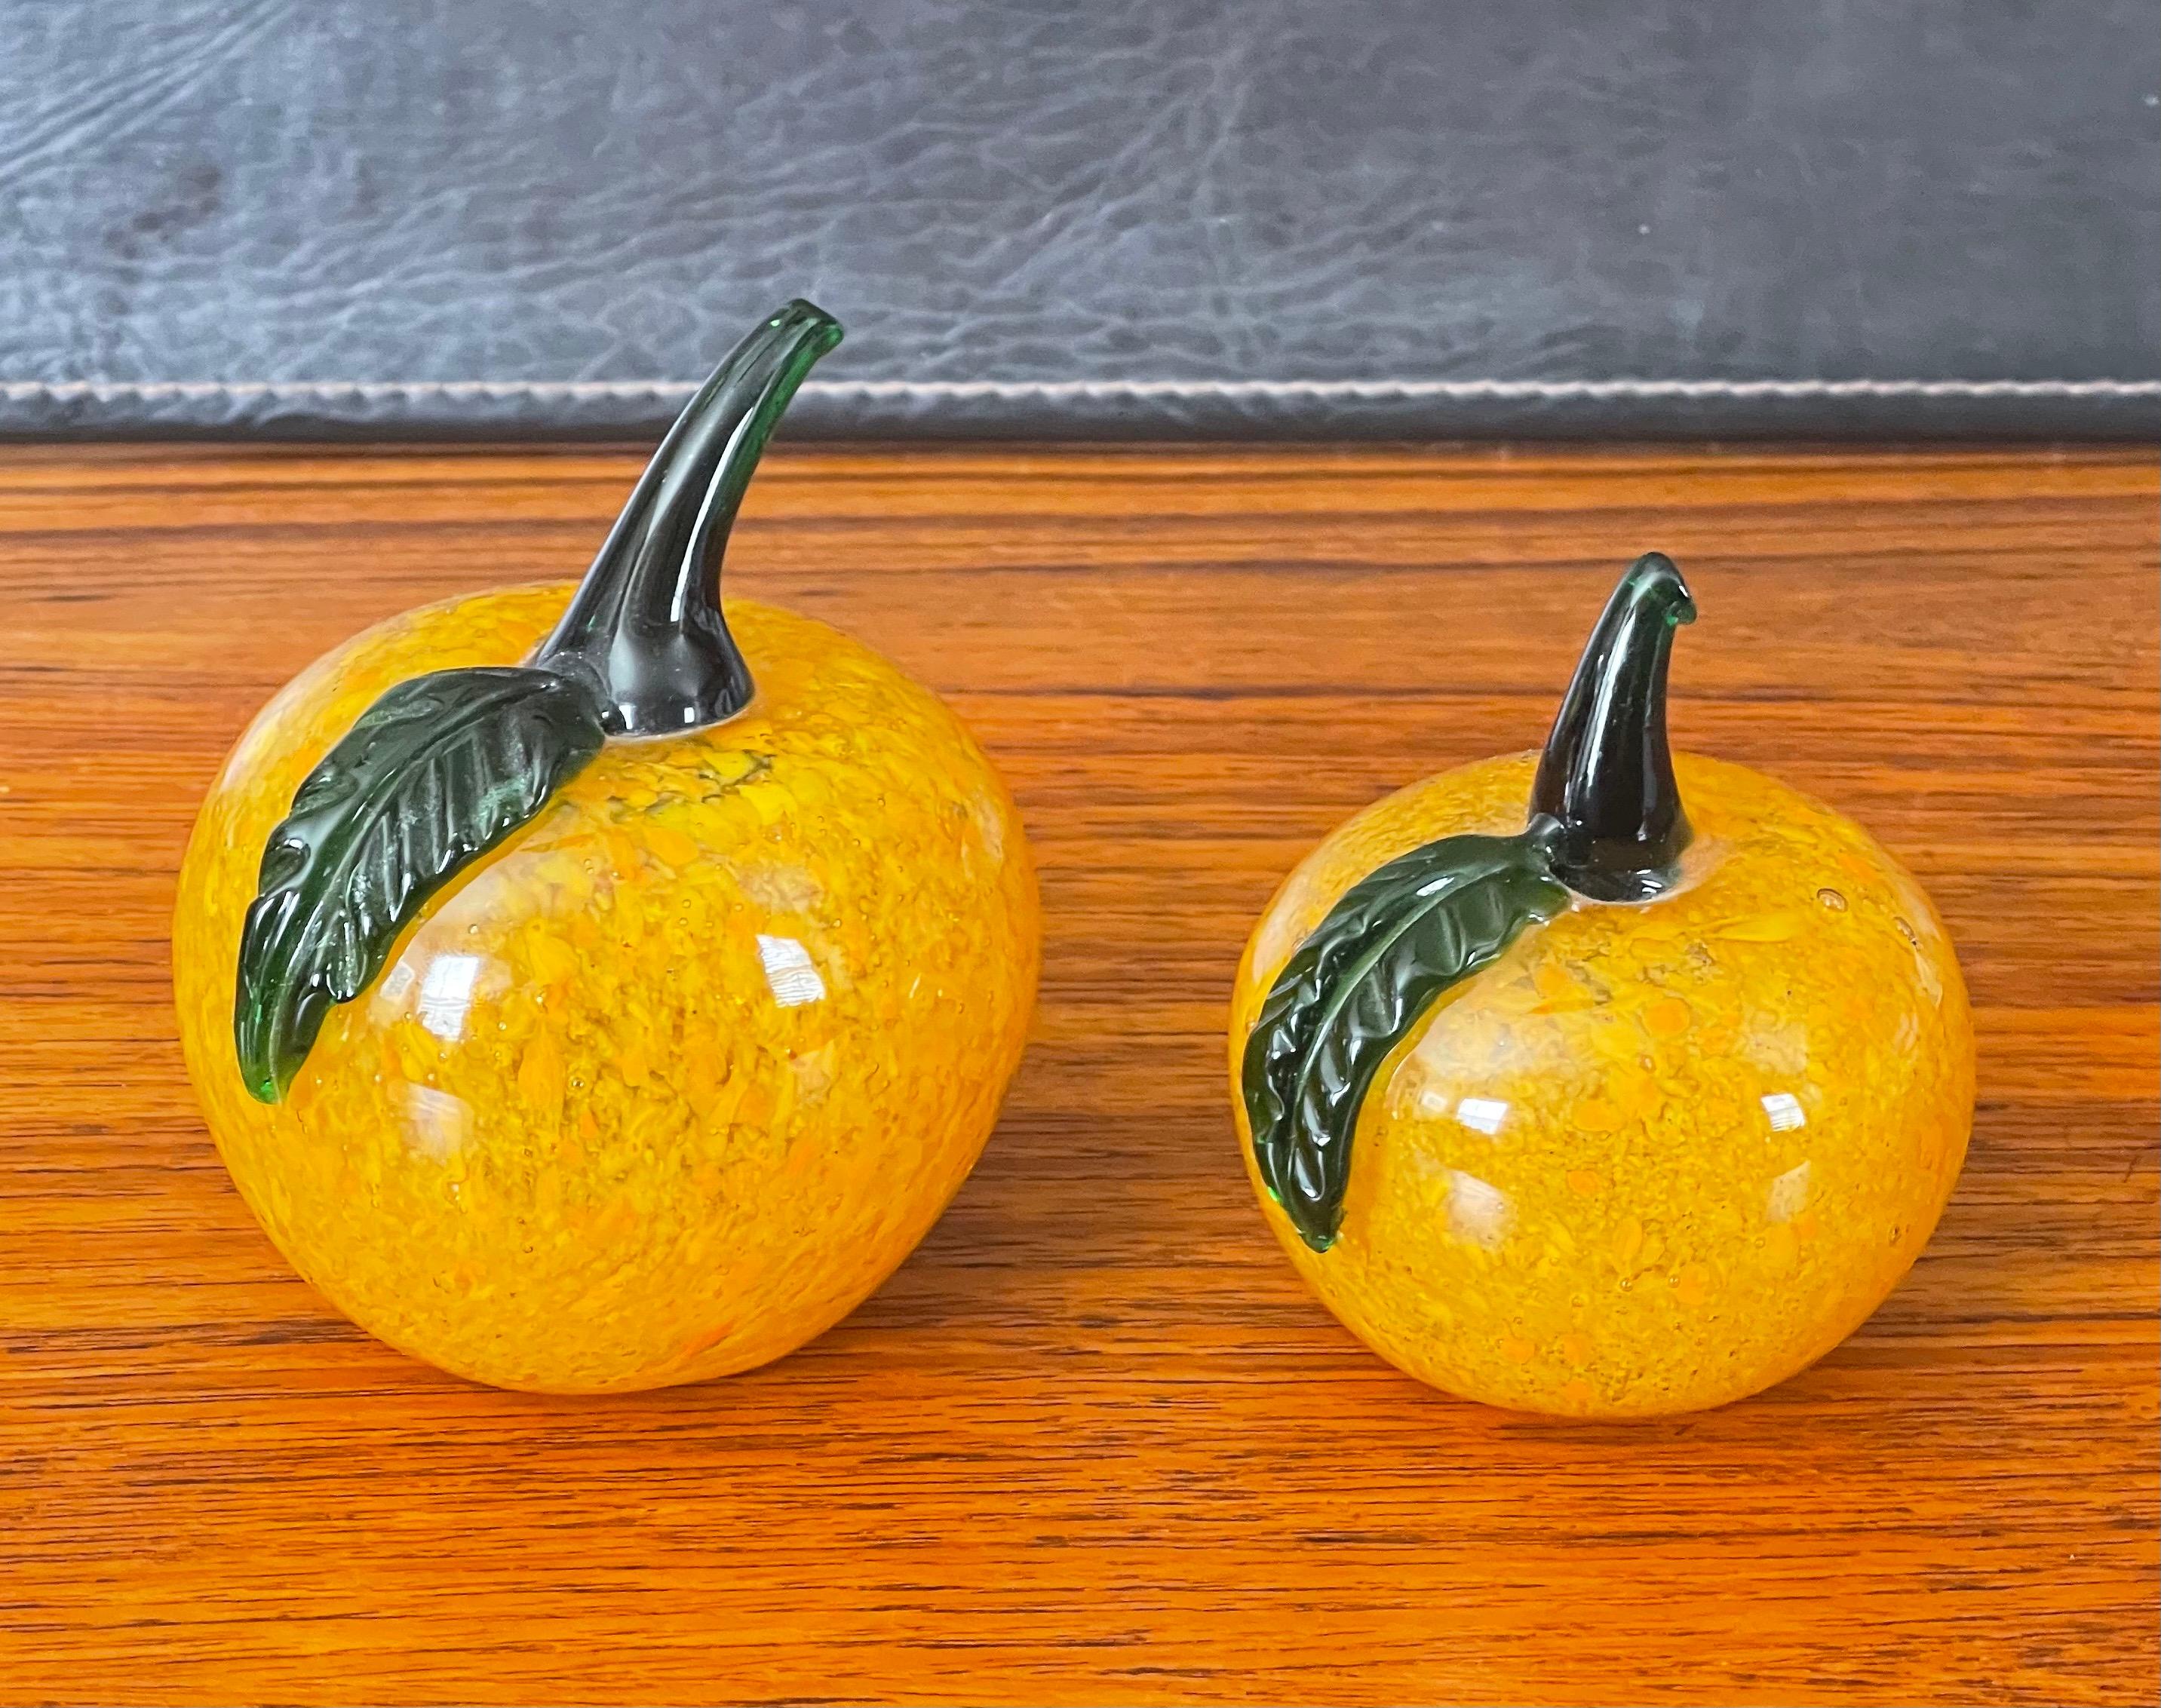 Nice pair of sommerso art glass pumpkins by Murano Glass Studios, circa 1970s. The pair are in very good vintage condition with no chips or cracks and have an orange sommerso style glass with deep orange, yellow and black speckles. The larger